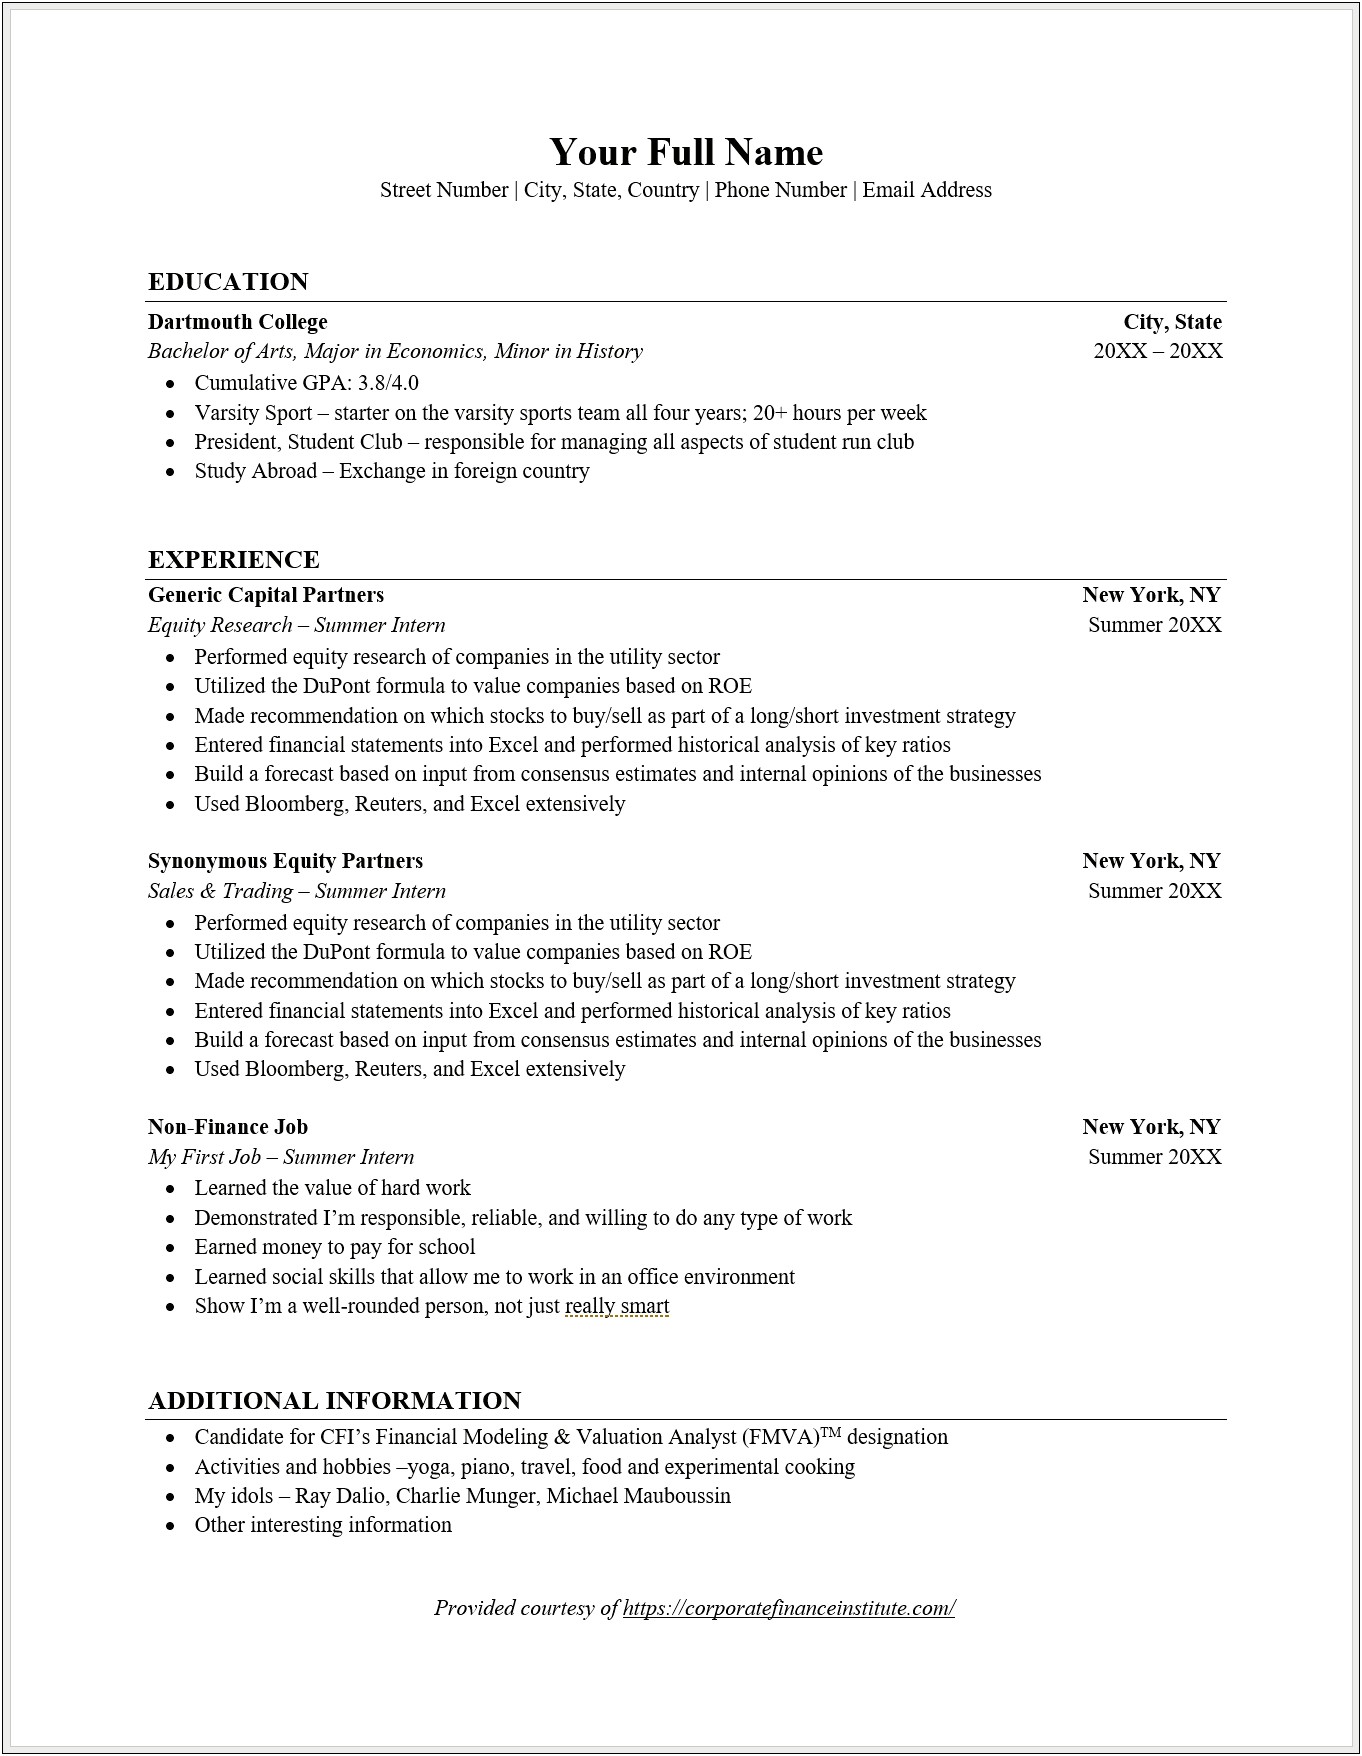 About Me Section Of Resume Example